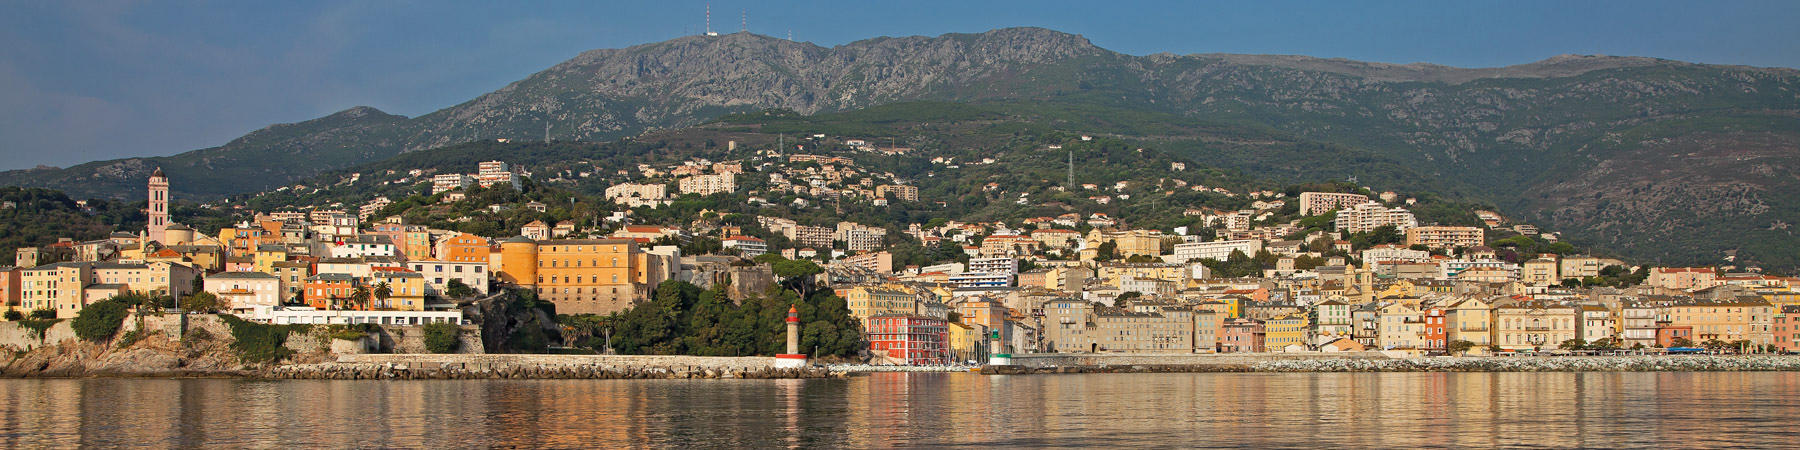 From Bastia to Santa Manza gulf - Photo Pêcheur d'Images